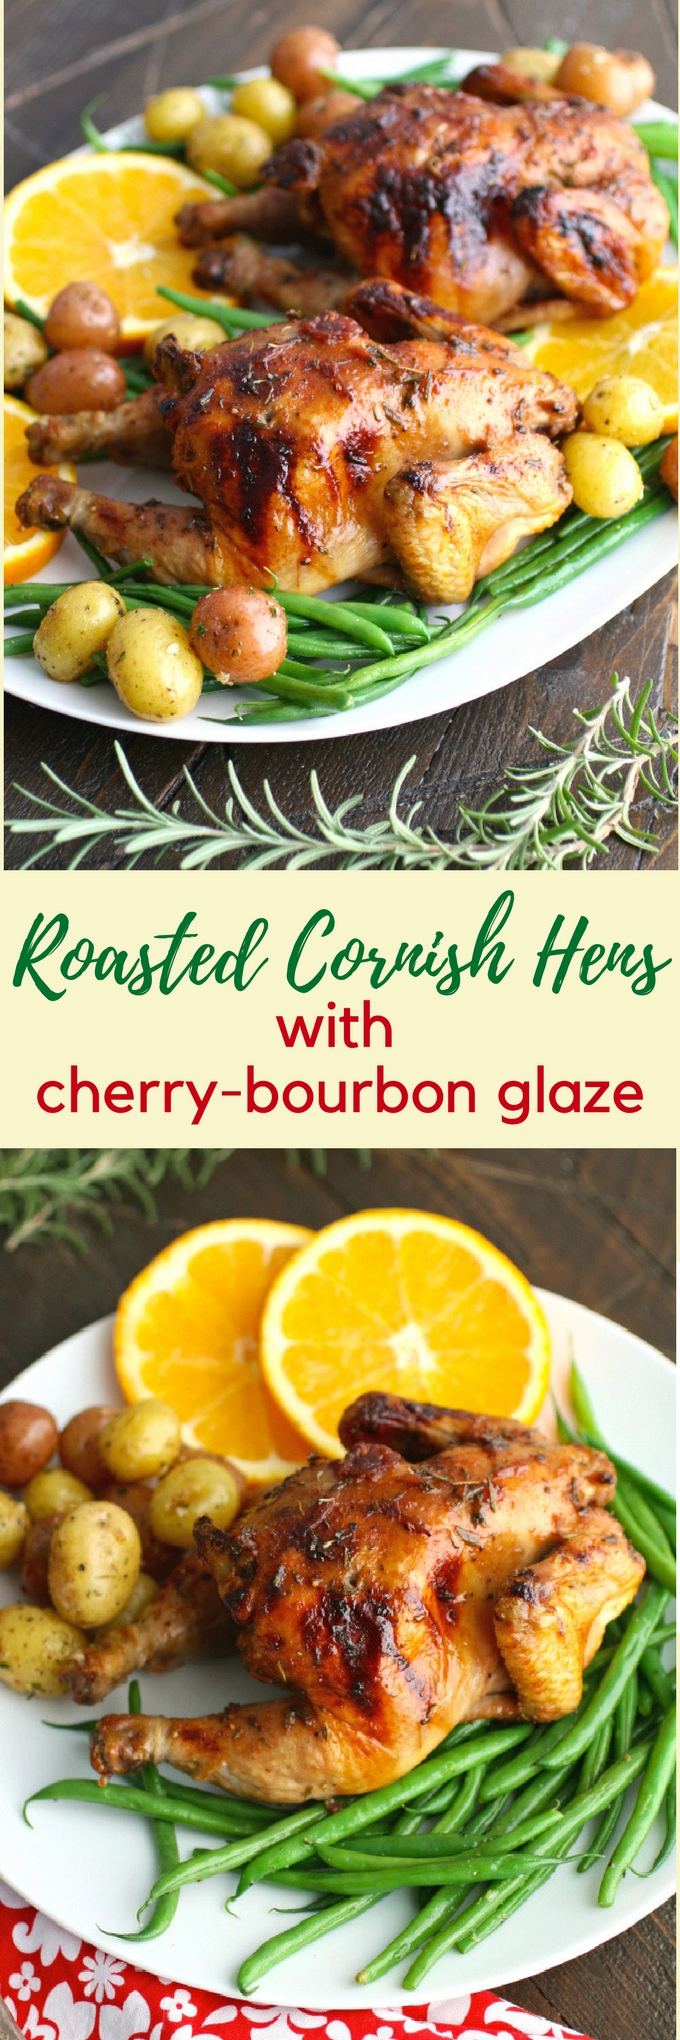 Roasted Cornish Hens with Cherry-Bourbon Glaze make an amazing holiday meal! Cornish hens are perfect for the holidays!